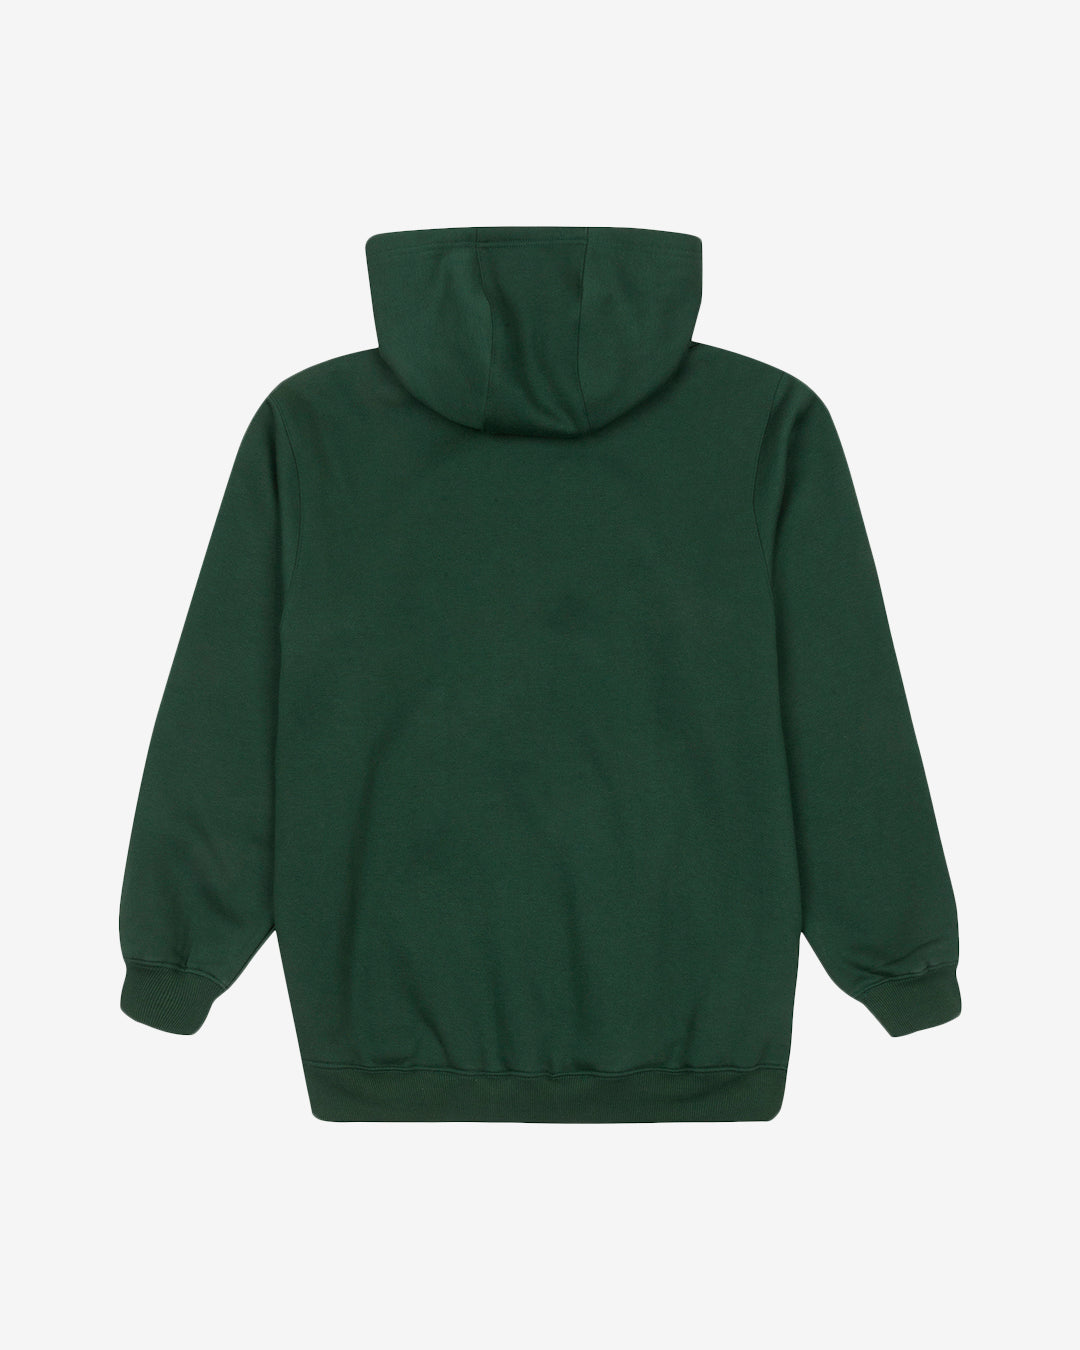 PFC: 002-2 - Men's Hoodie - Forest Green